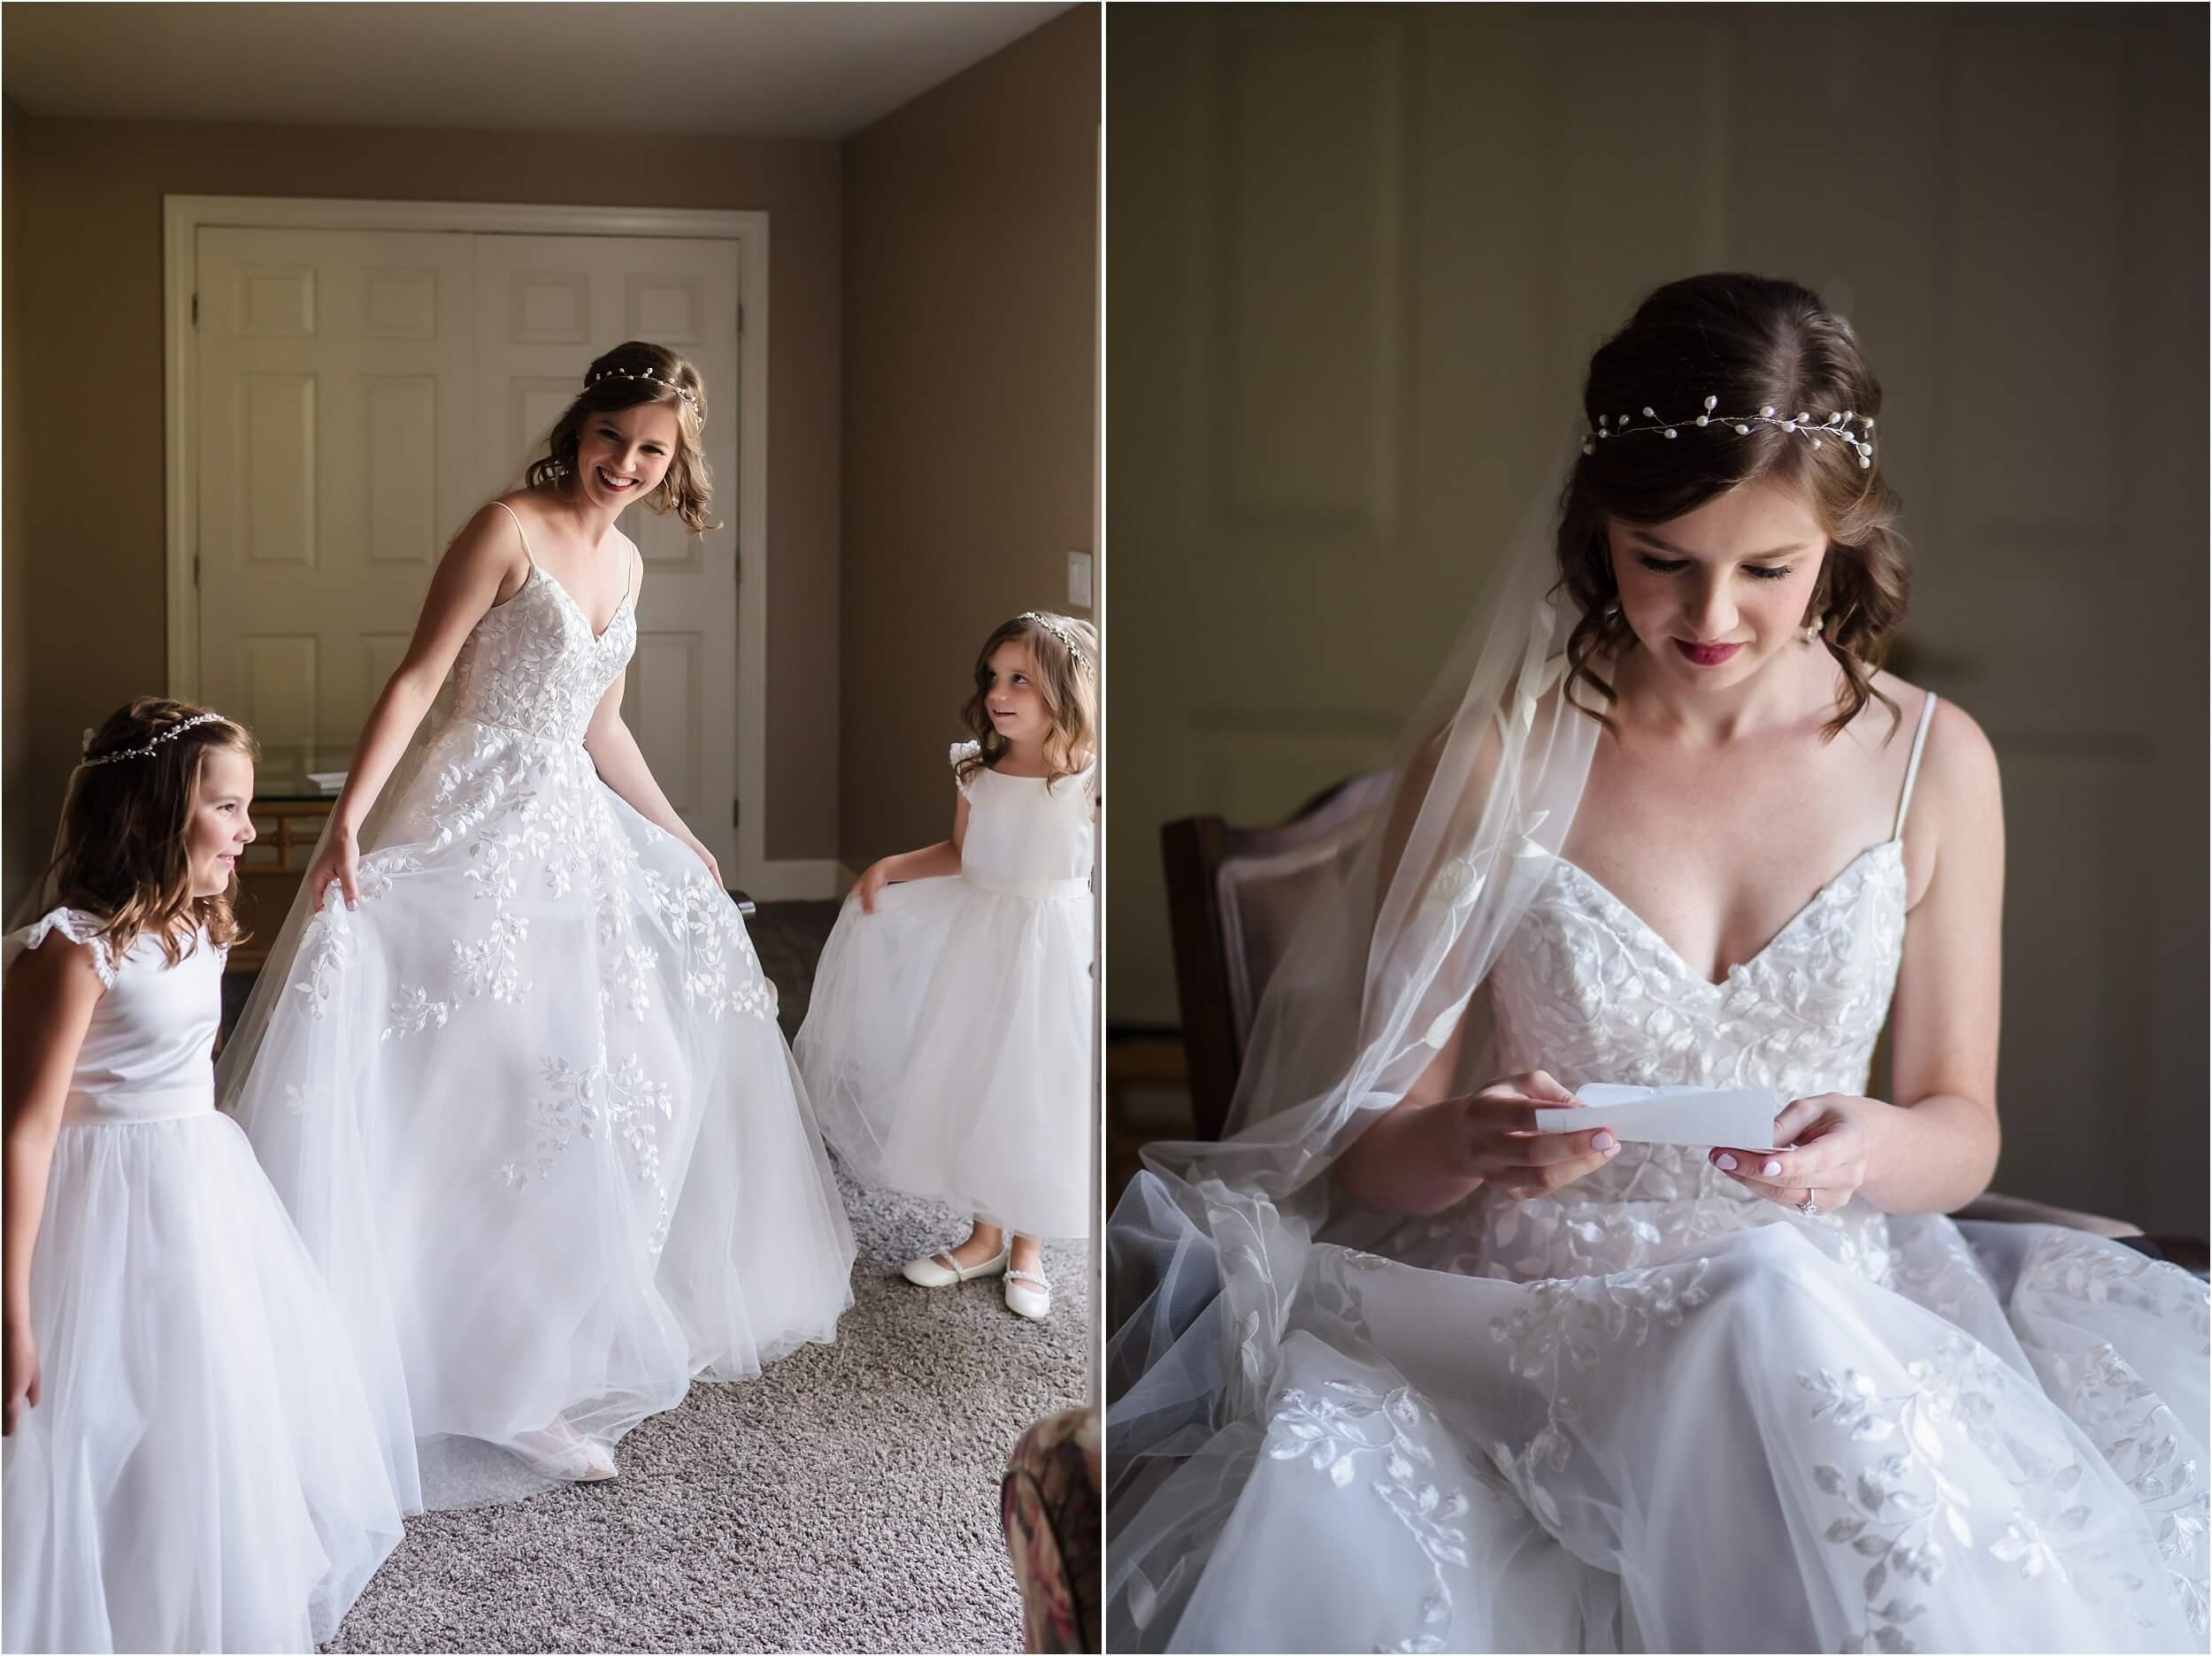  A bride shows her dress off to her flower girls and they excitedly show their dresses off in response.  